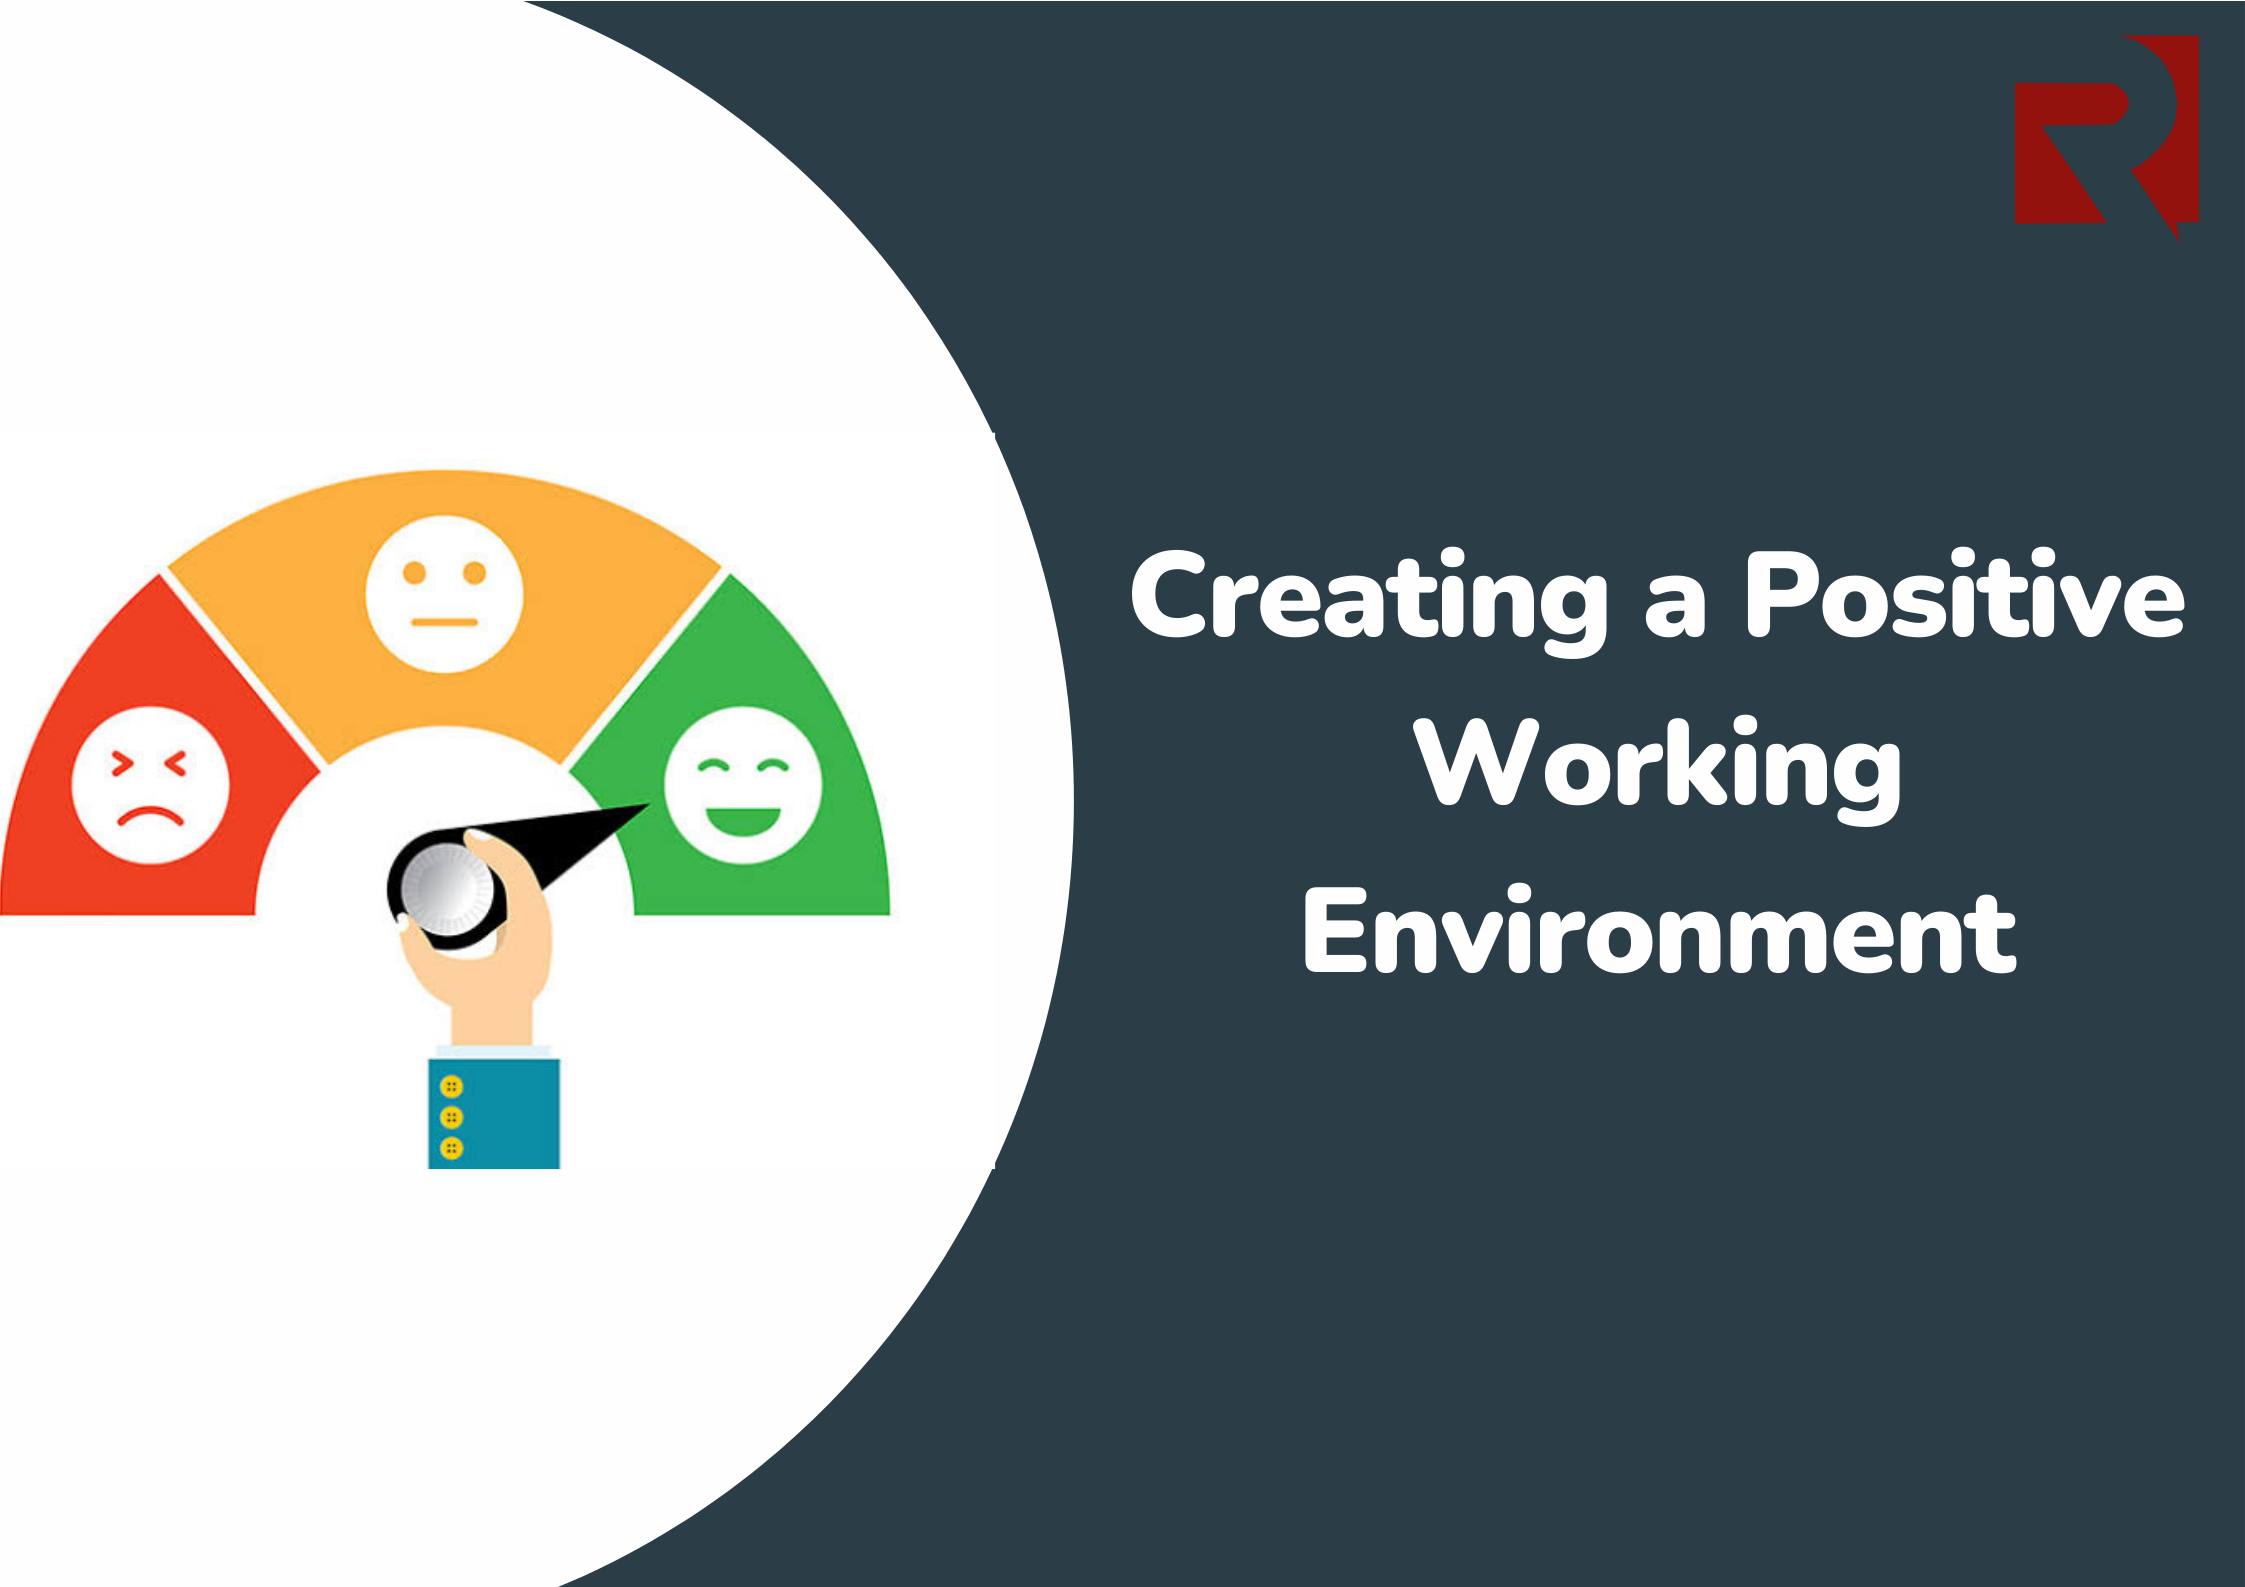 Creating a Positive Working Environment